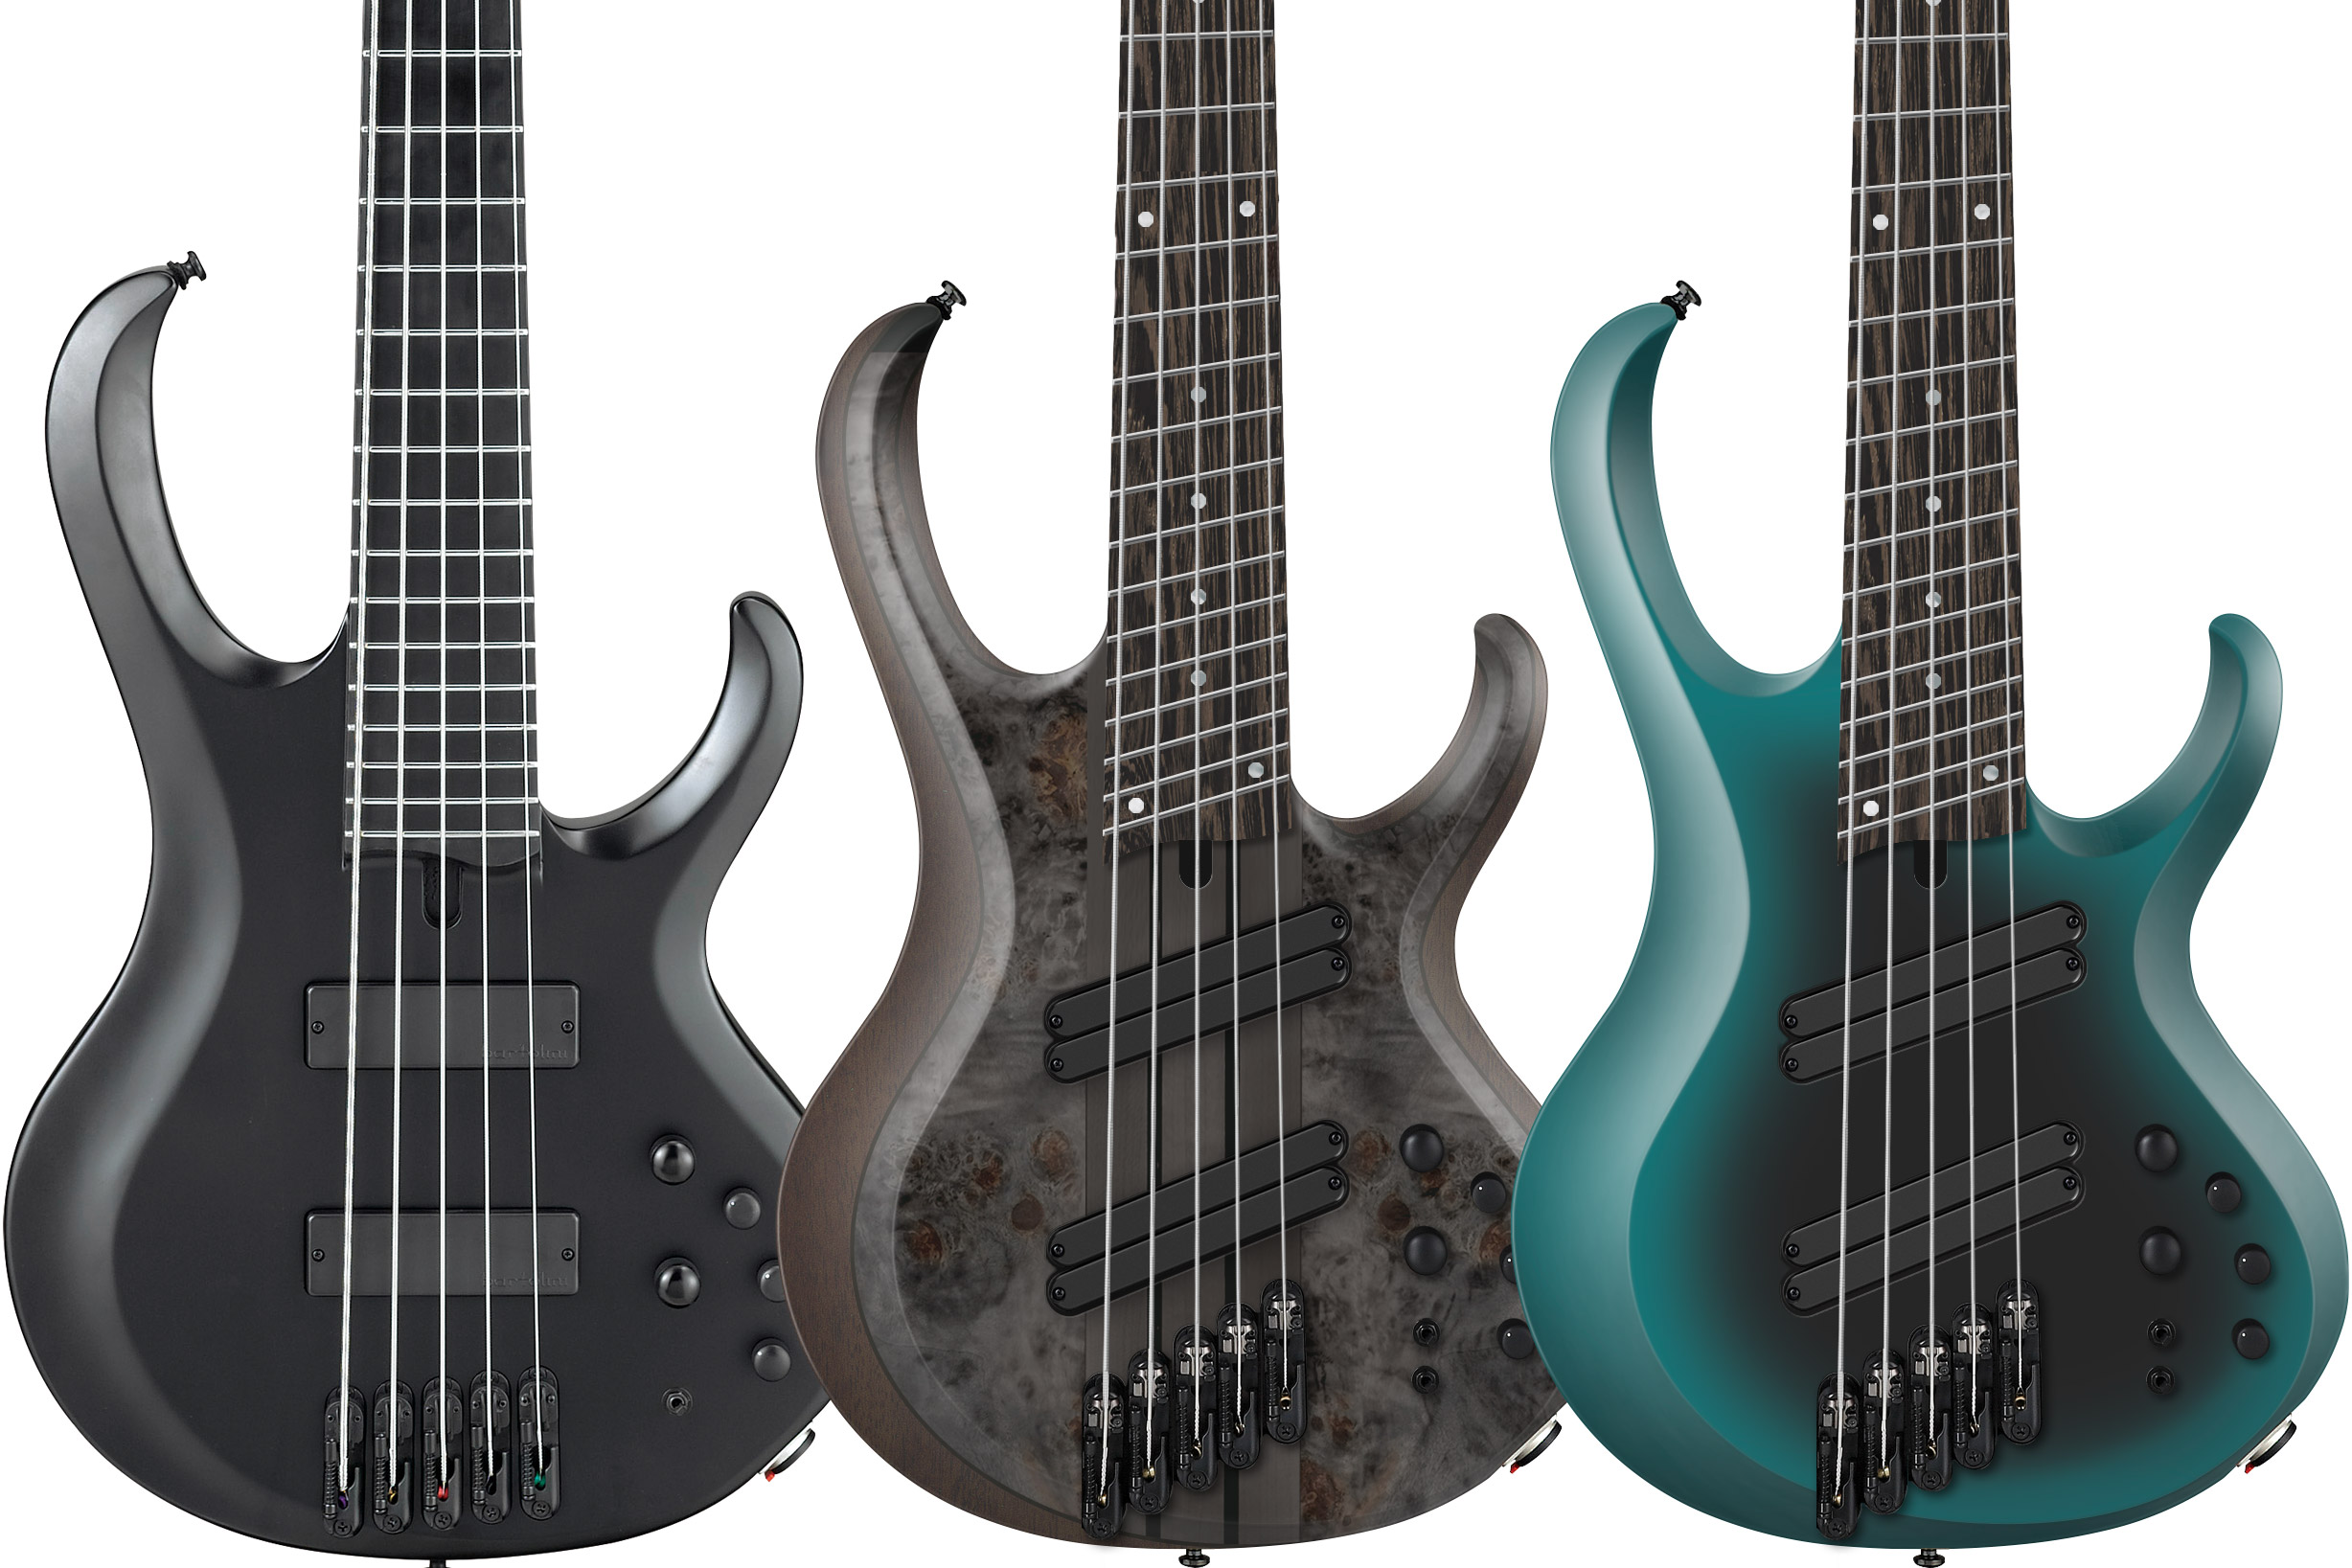 Ibanez Adds Three Multi-Scale BTB Bass Models for 2022 – No Treble